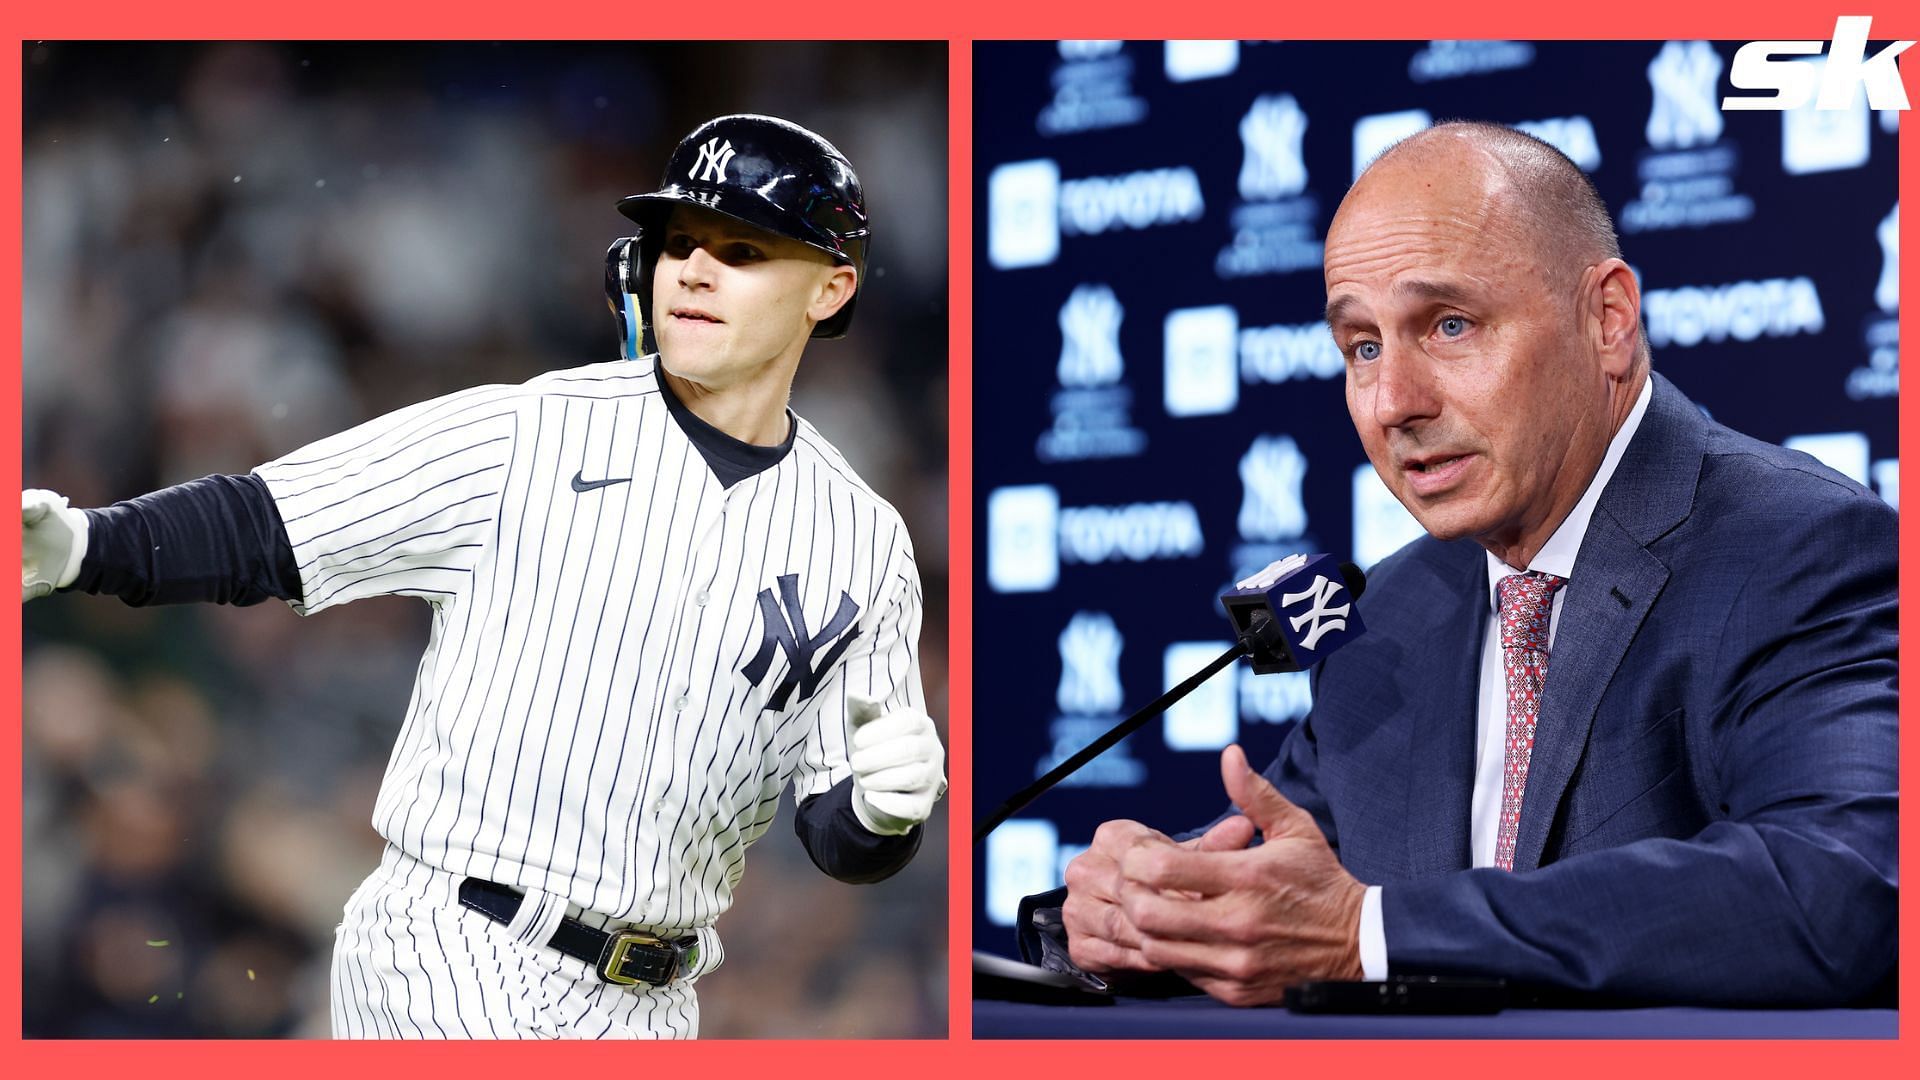 Jake Bauers and Brian Cashman of the New York Yankees